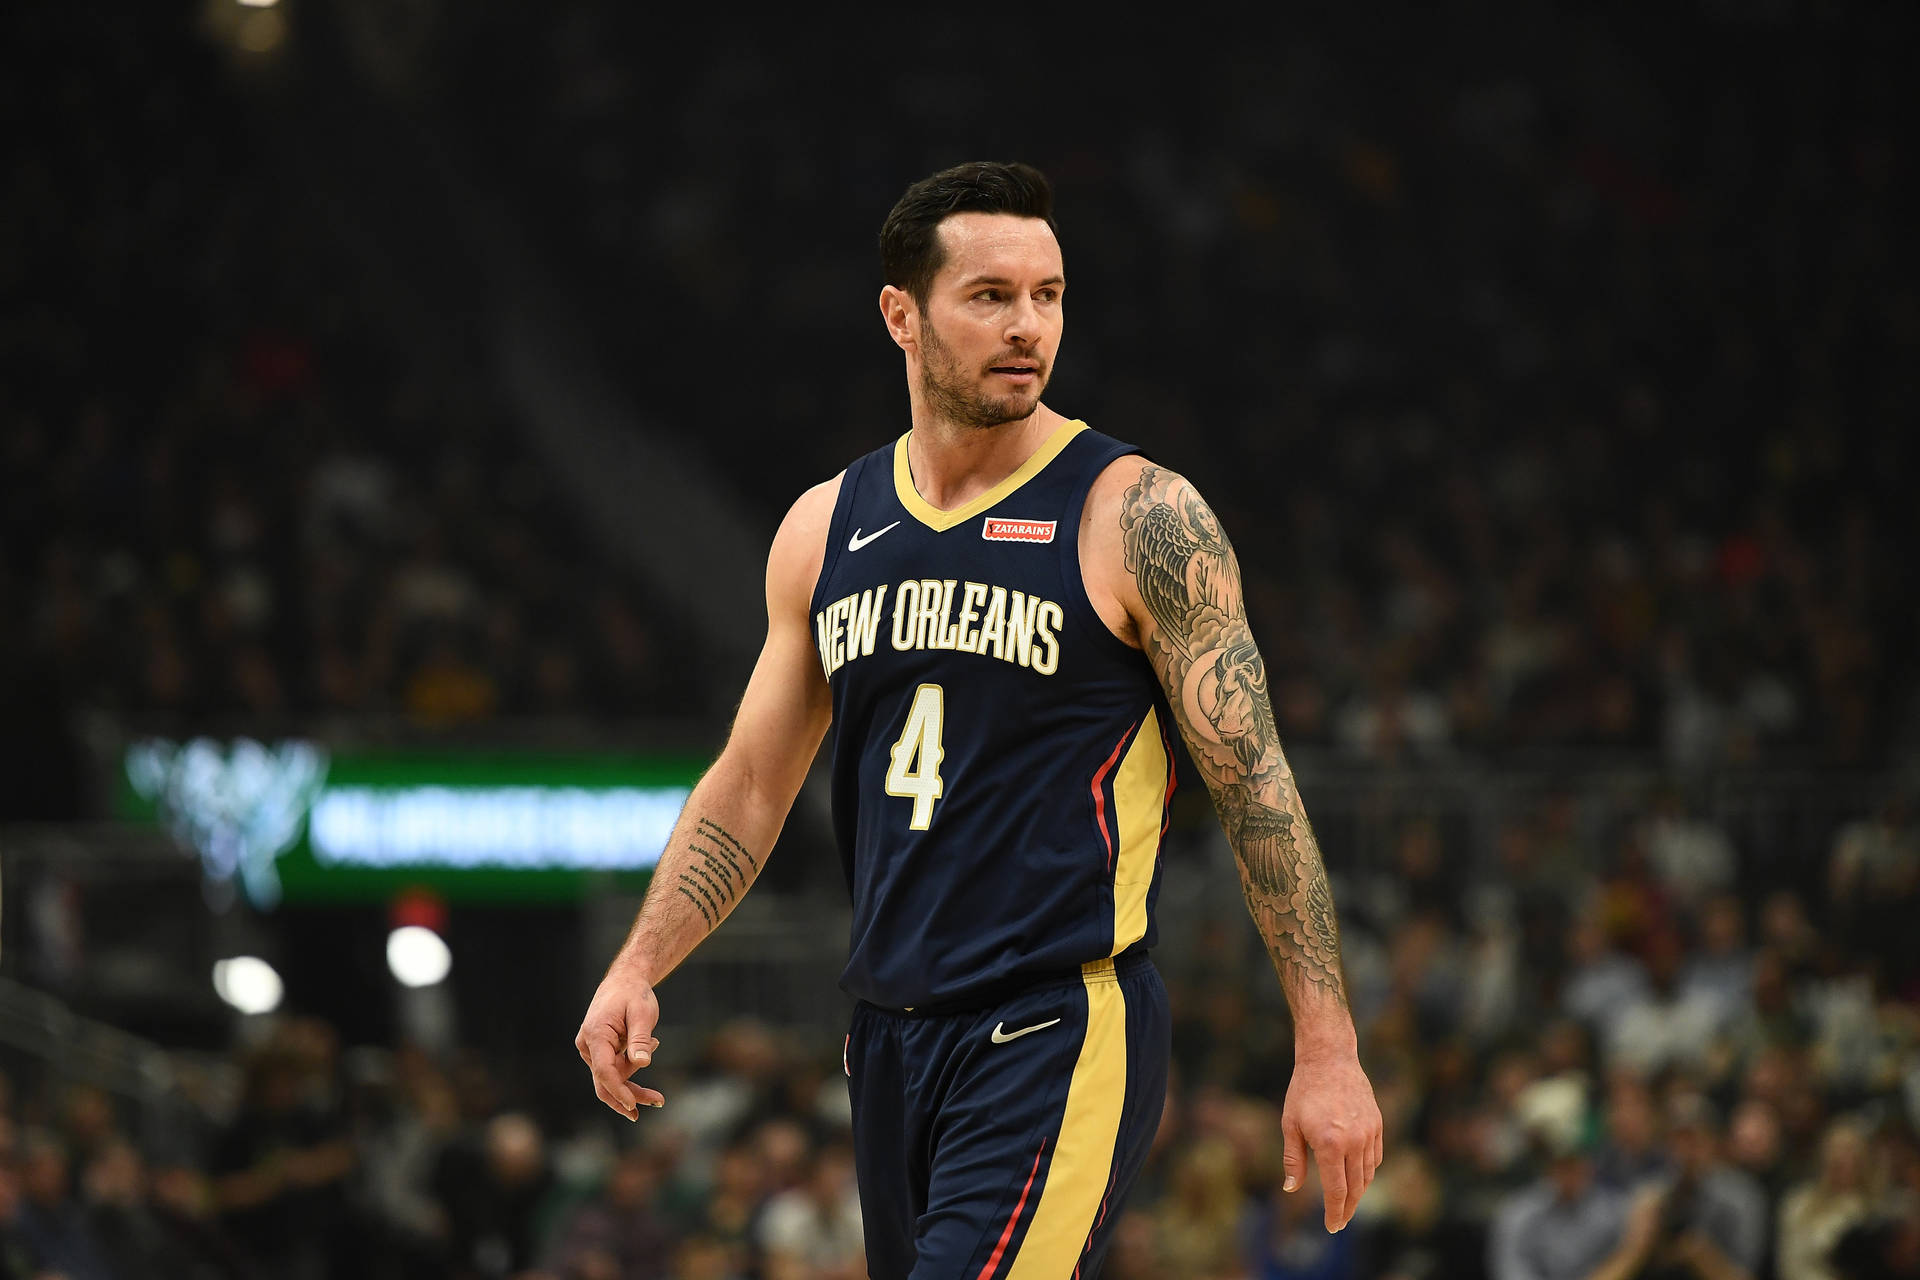 Jj Redick In New Orleans Jersey Background